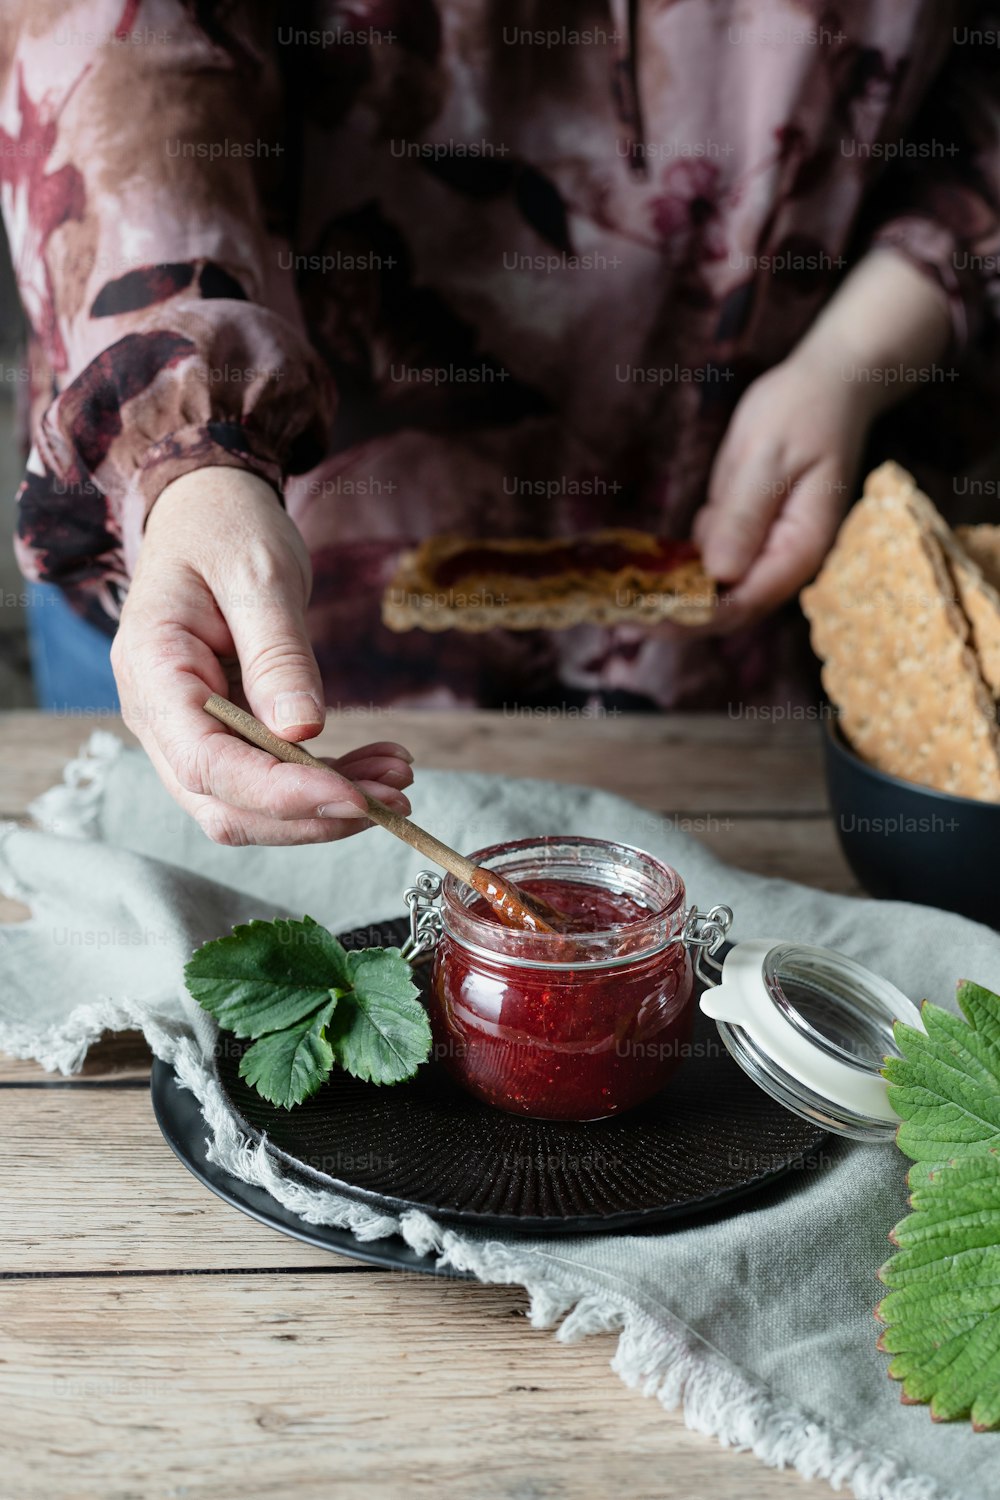 a person holding a spoon over a jar of jam